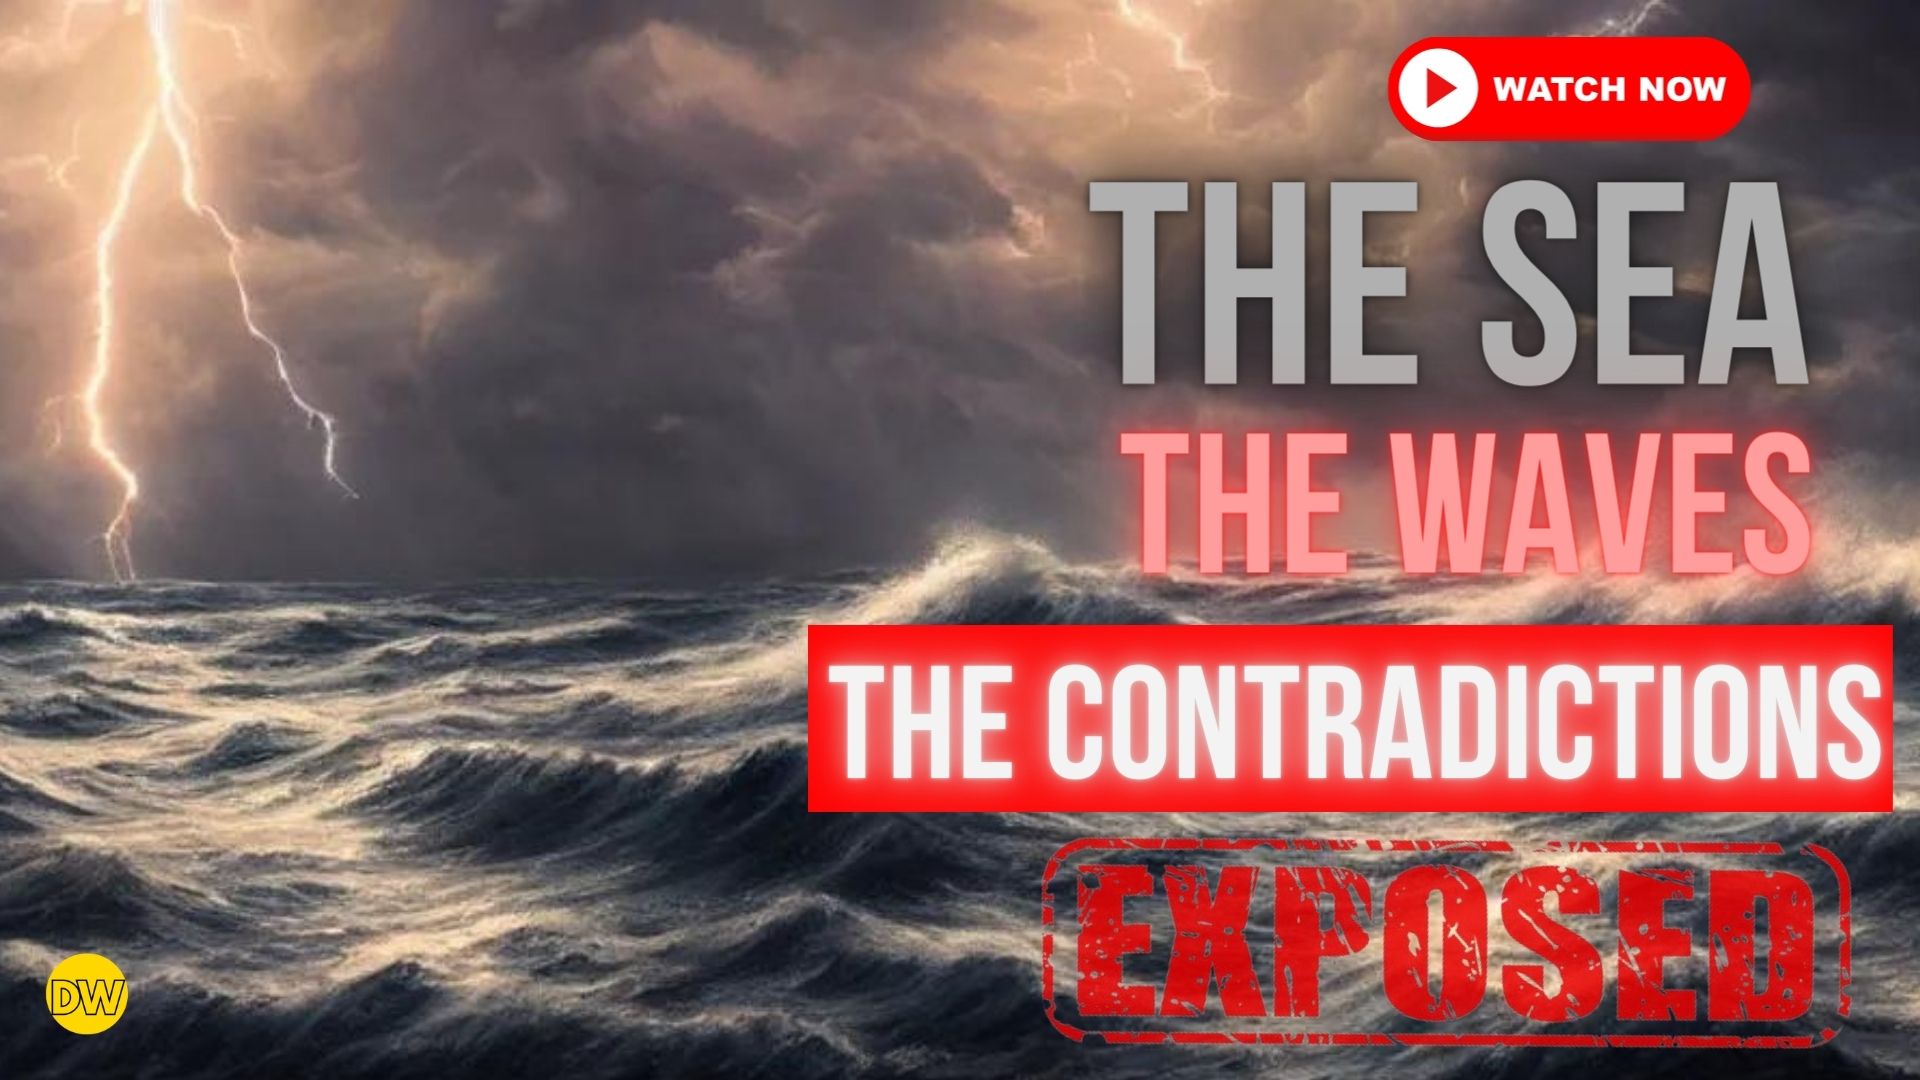 The Sea, The Waves And The Contradictions: How To Enjoy VICTORY In The BATTLE of Contradictions